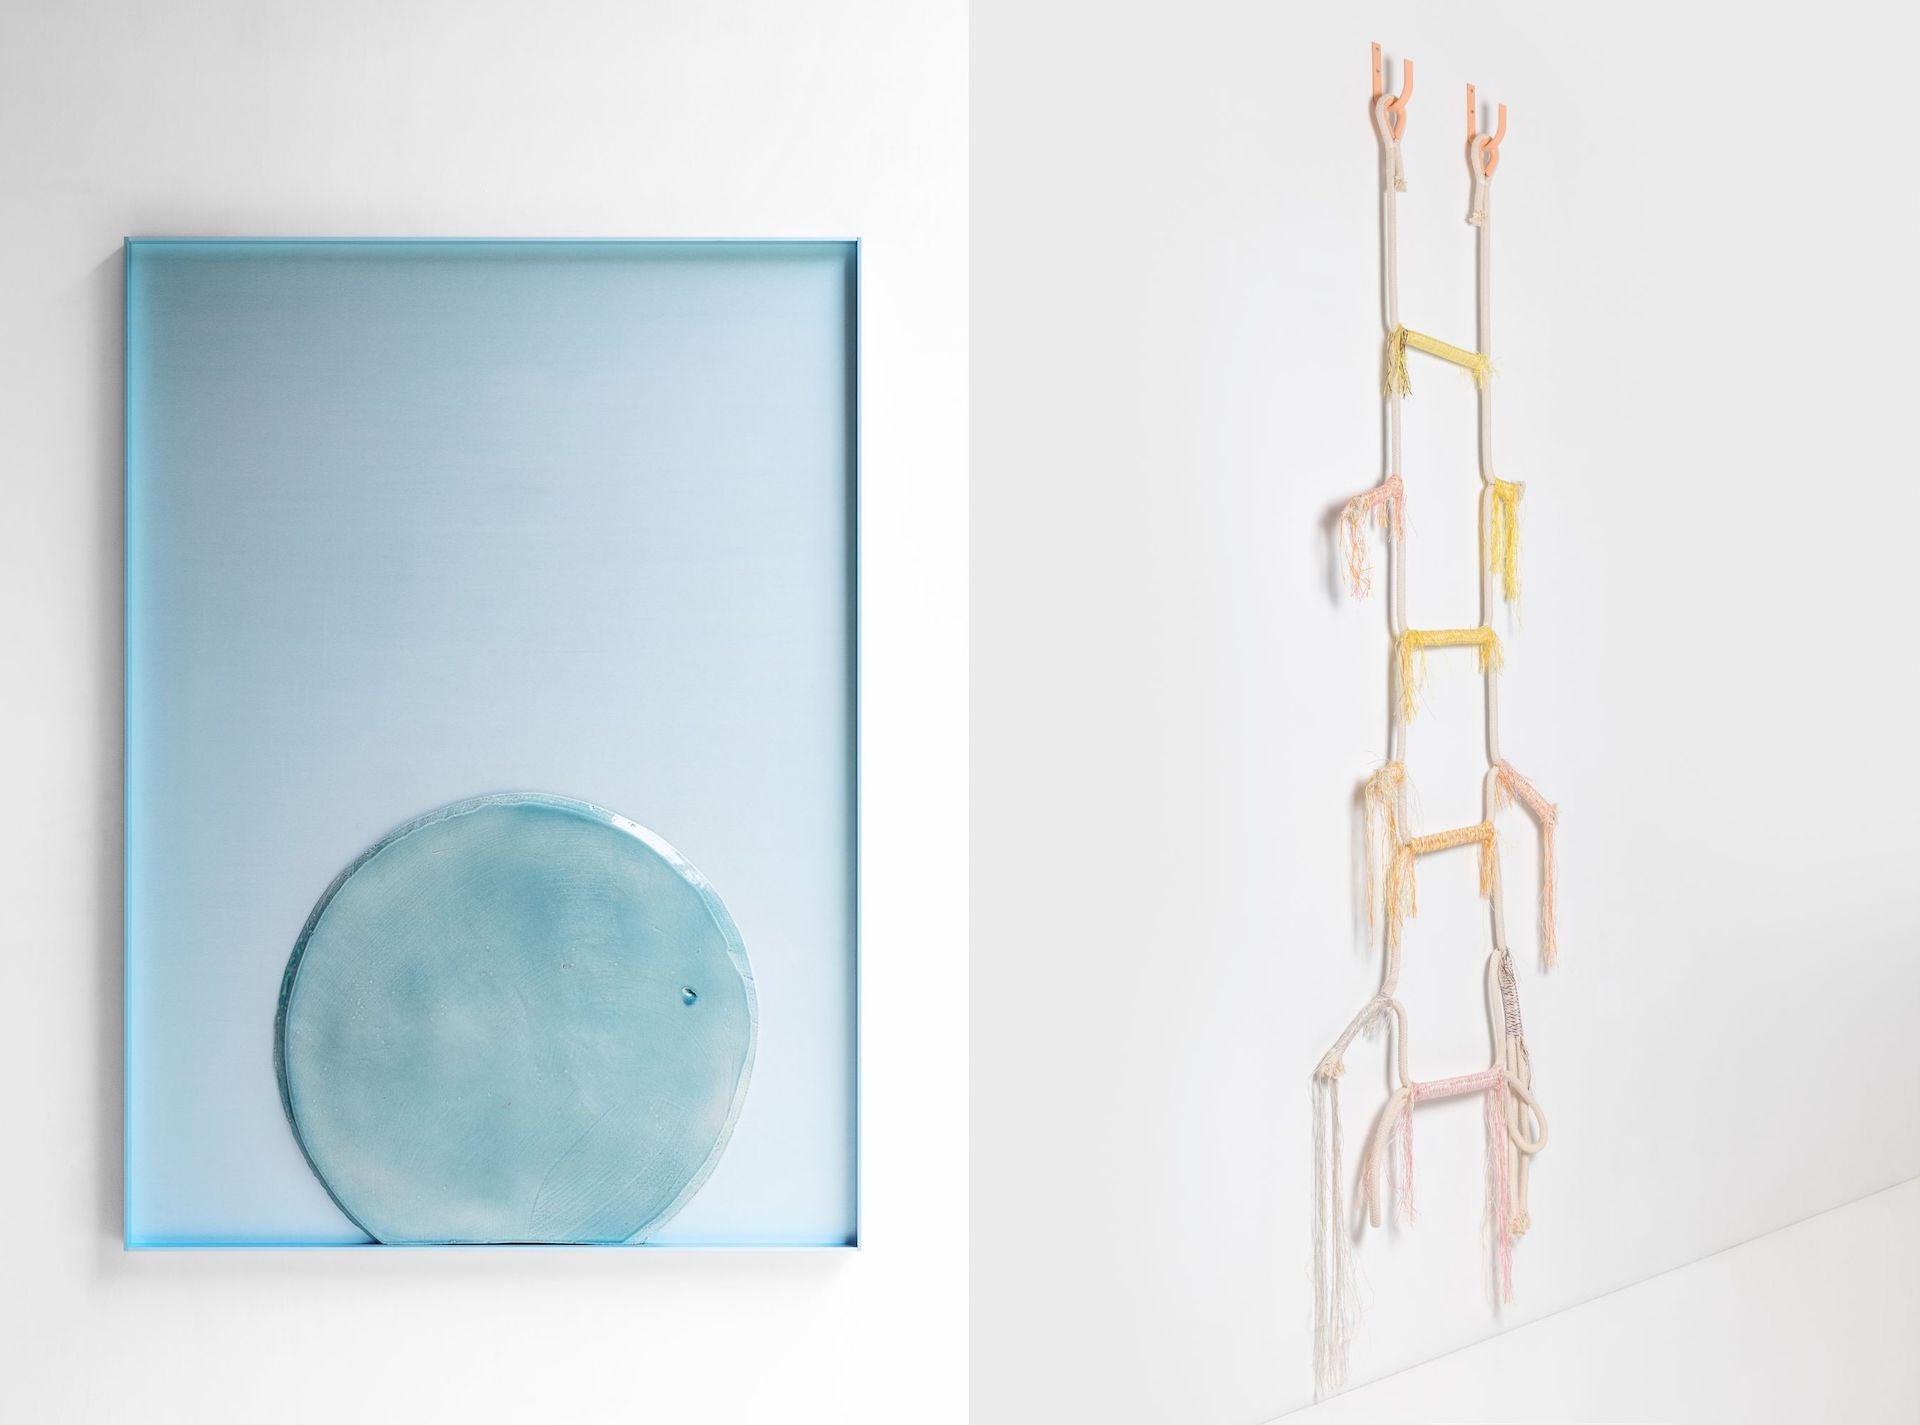 From left: Ronan Bouroullec’s bas-relief. Photo © Studio Bouroullec and Claire Lavabreand. Twisted Steps by Hella Jongerius. Photo © Alexandra de Cossette. Courtesy of Galerie kreo